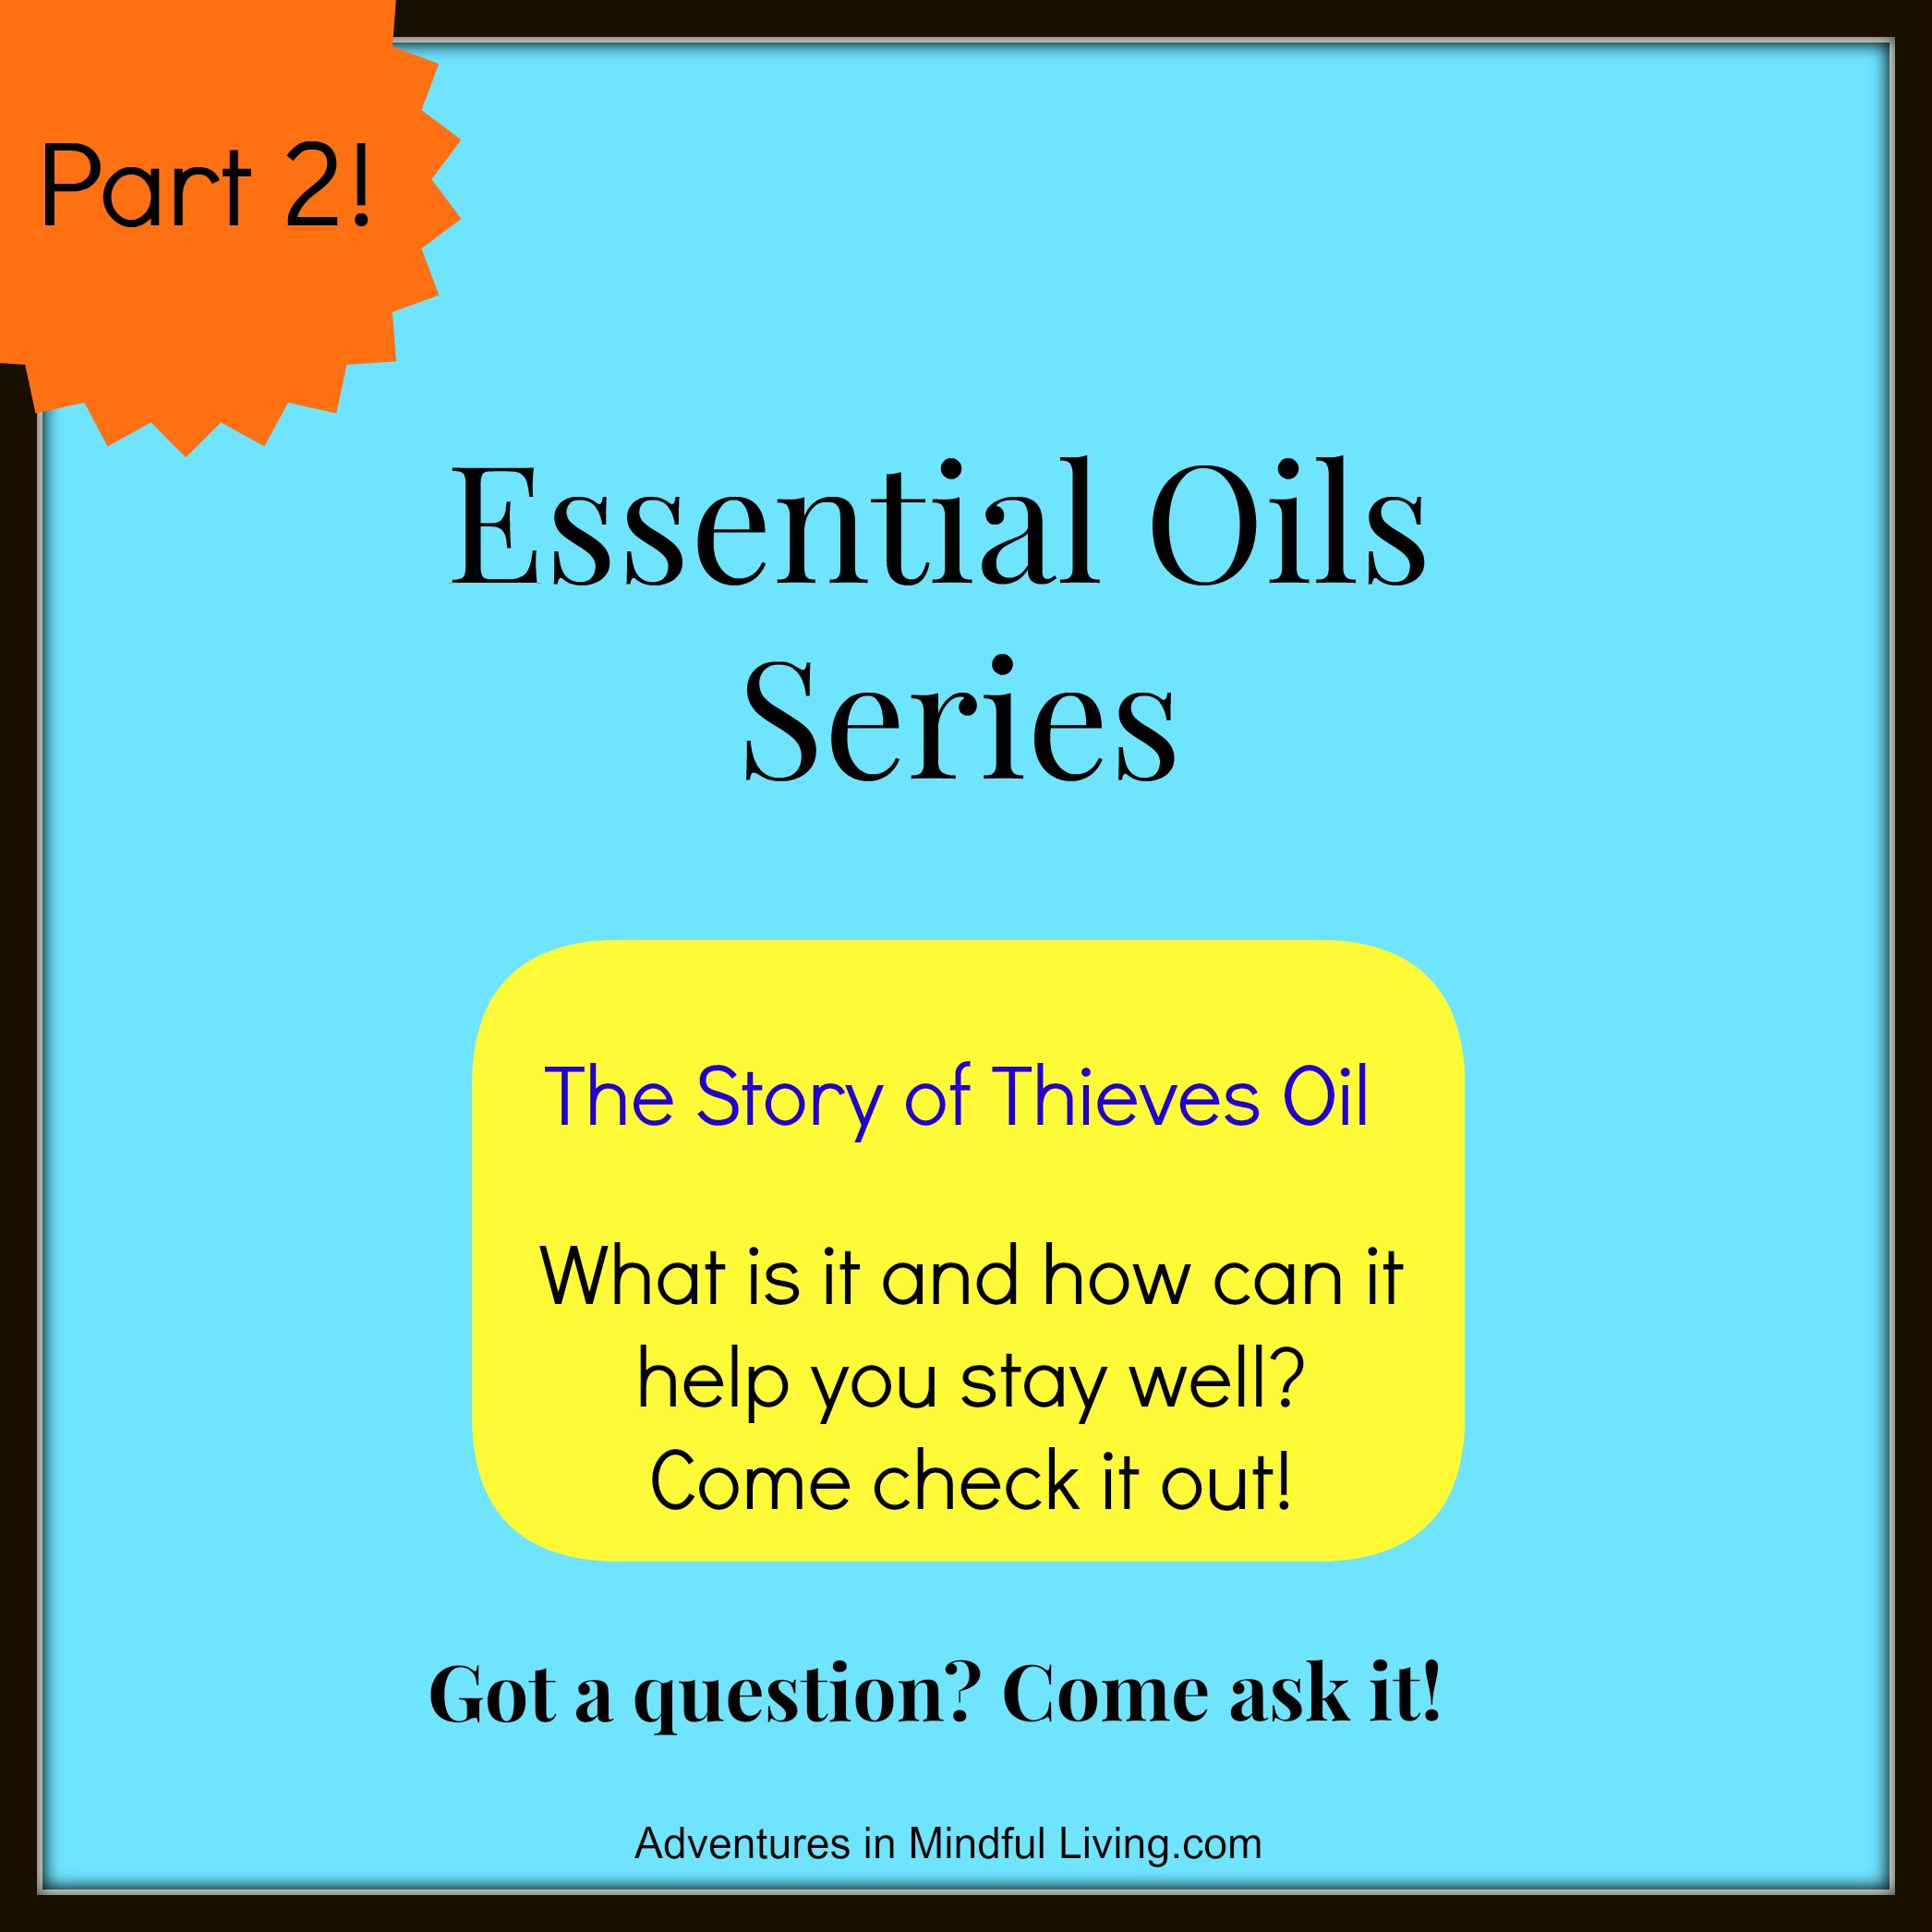 Essential Oil Series ( Part 2). Thieves Oil! What is it and how can it keep you well? Got some questions? Come ask them!! Adventures in Mindful Living!